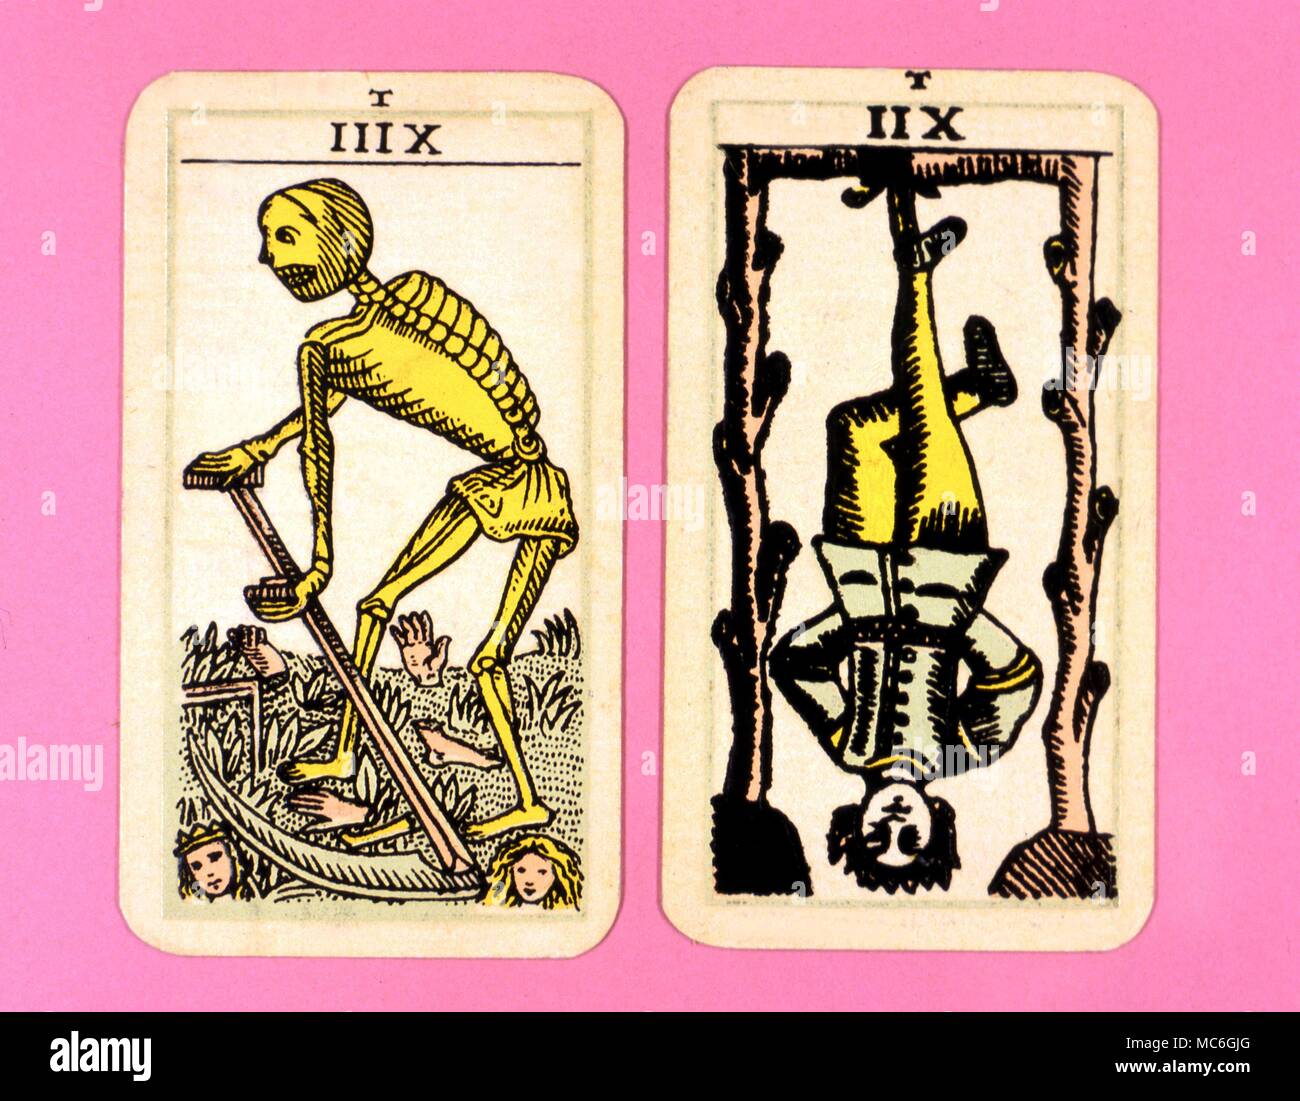 Tarot Cards-Majo Arcana- The Parisian Tarot. Card 12. The Hanging Man and  Card 13. The Death Card. Two cards from a Major Arcana picture Tarot,  probably designed in an archaizing style in